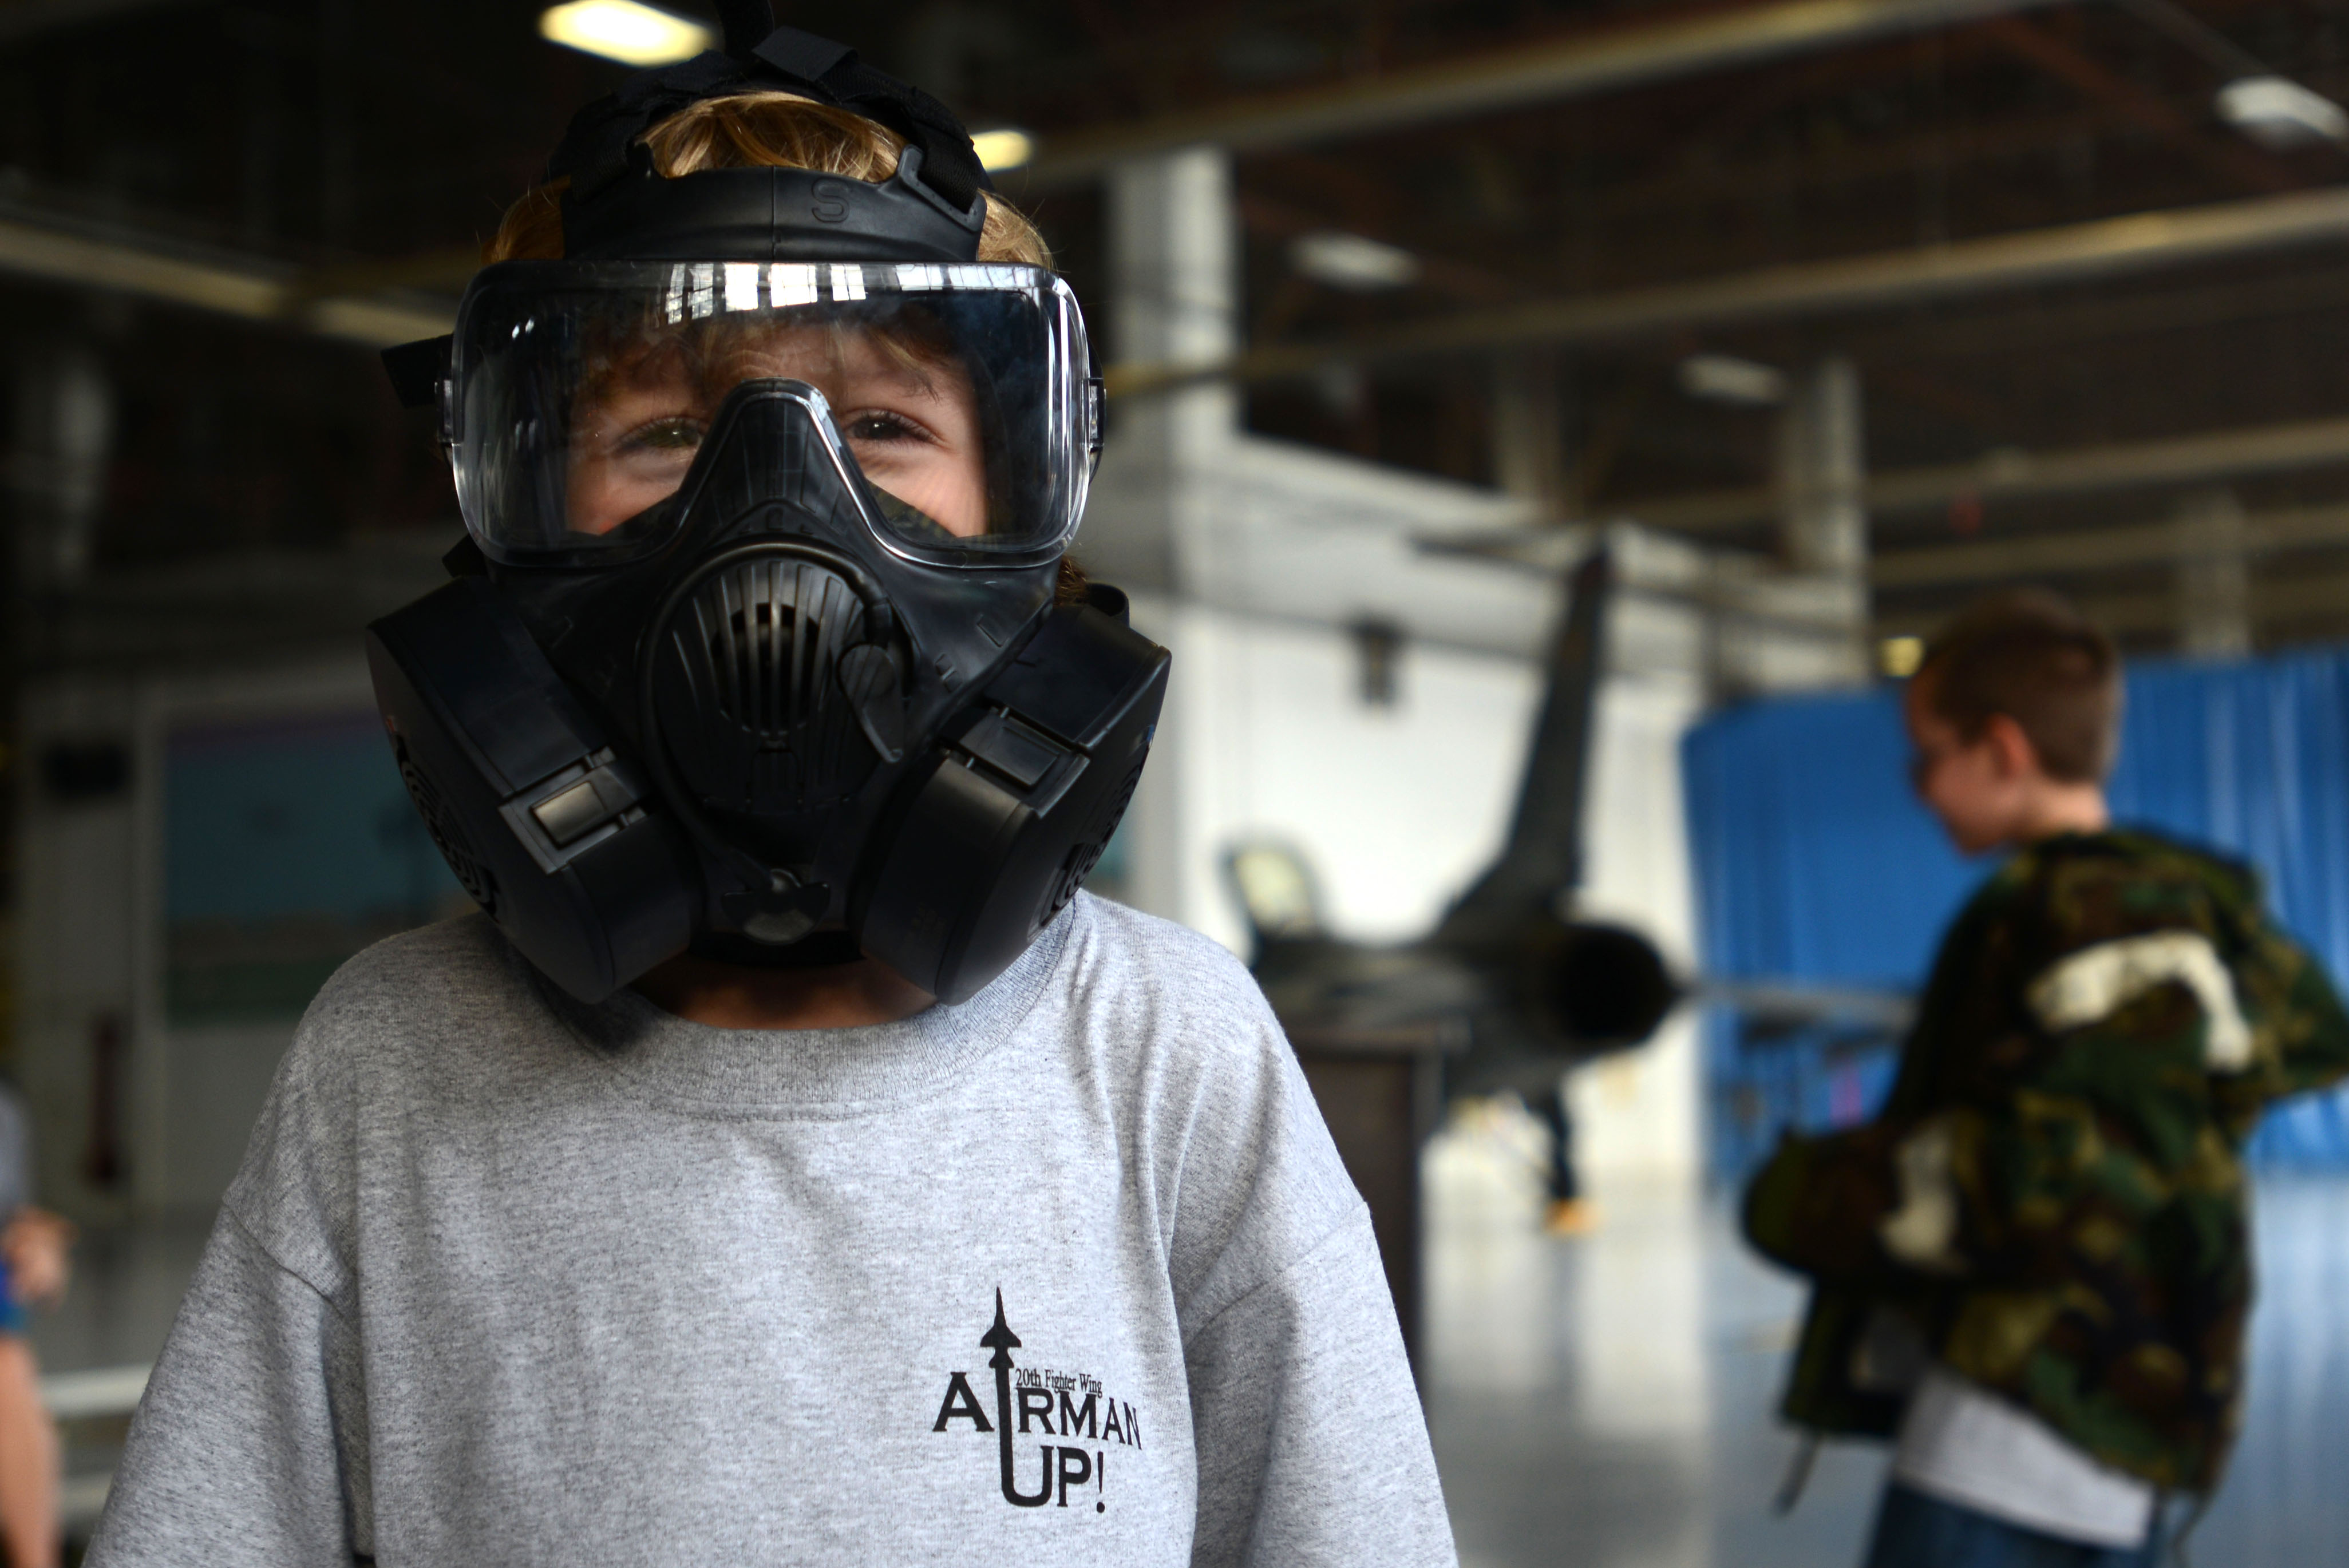 Tips Why You Should Keep Your Family Safe With A Gas Mask Kit